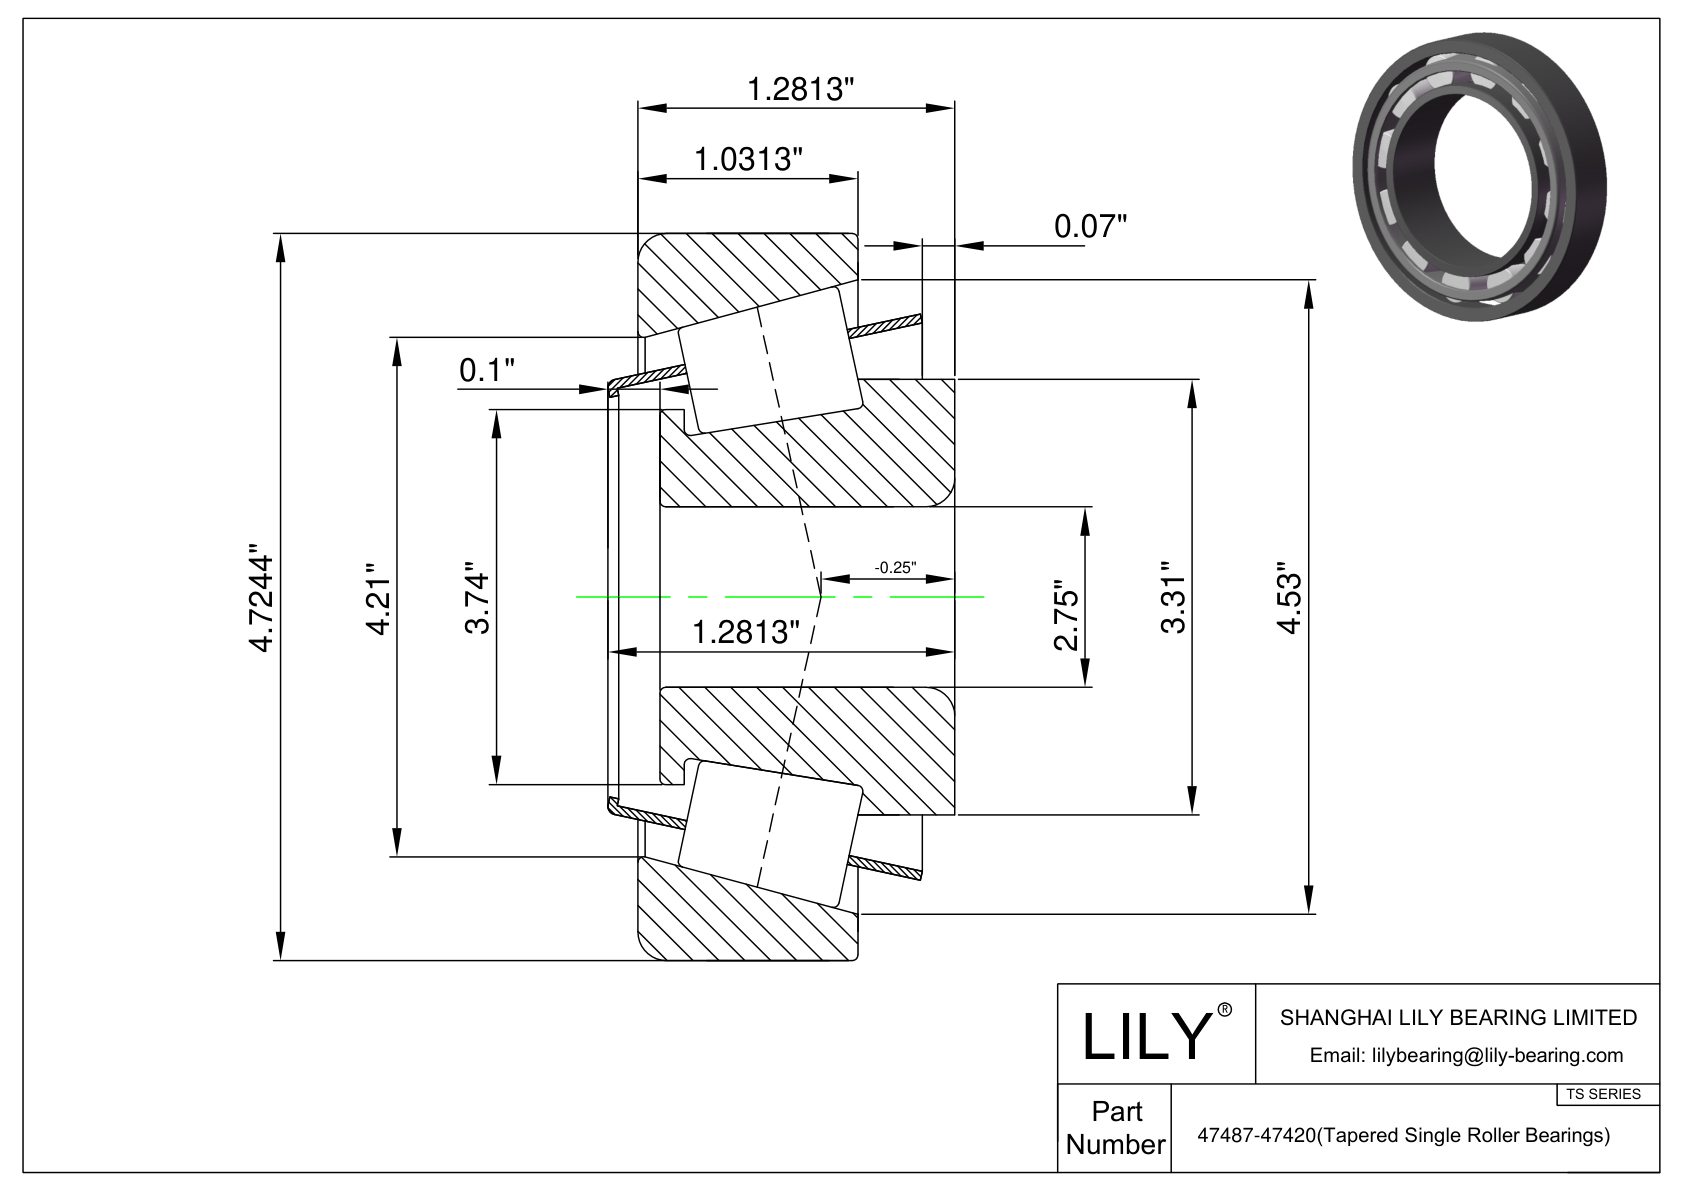 47487-47420 TS (Tapered Single Roller Bearings) (Imperial) cad drawing